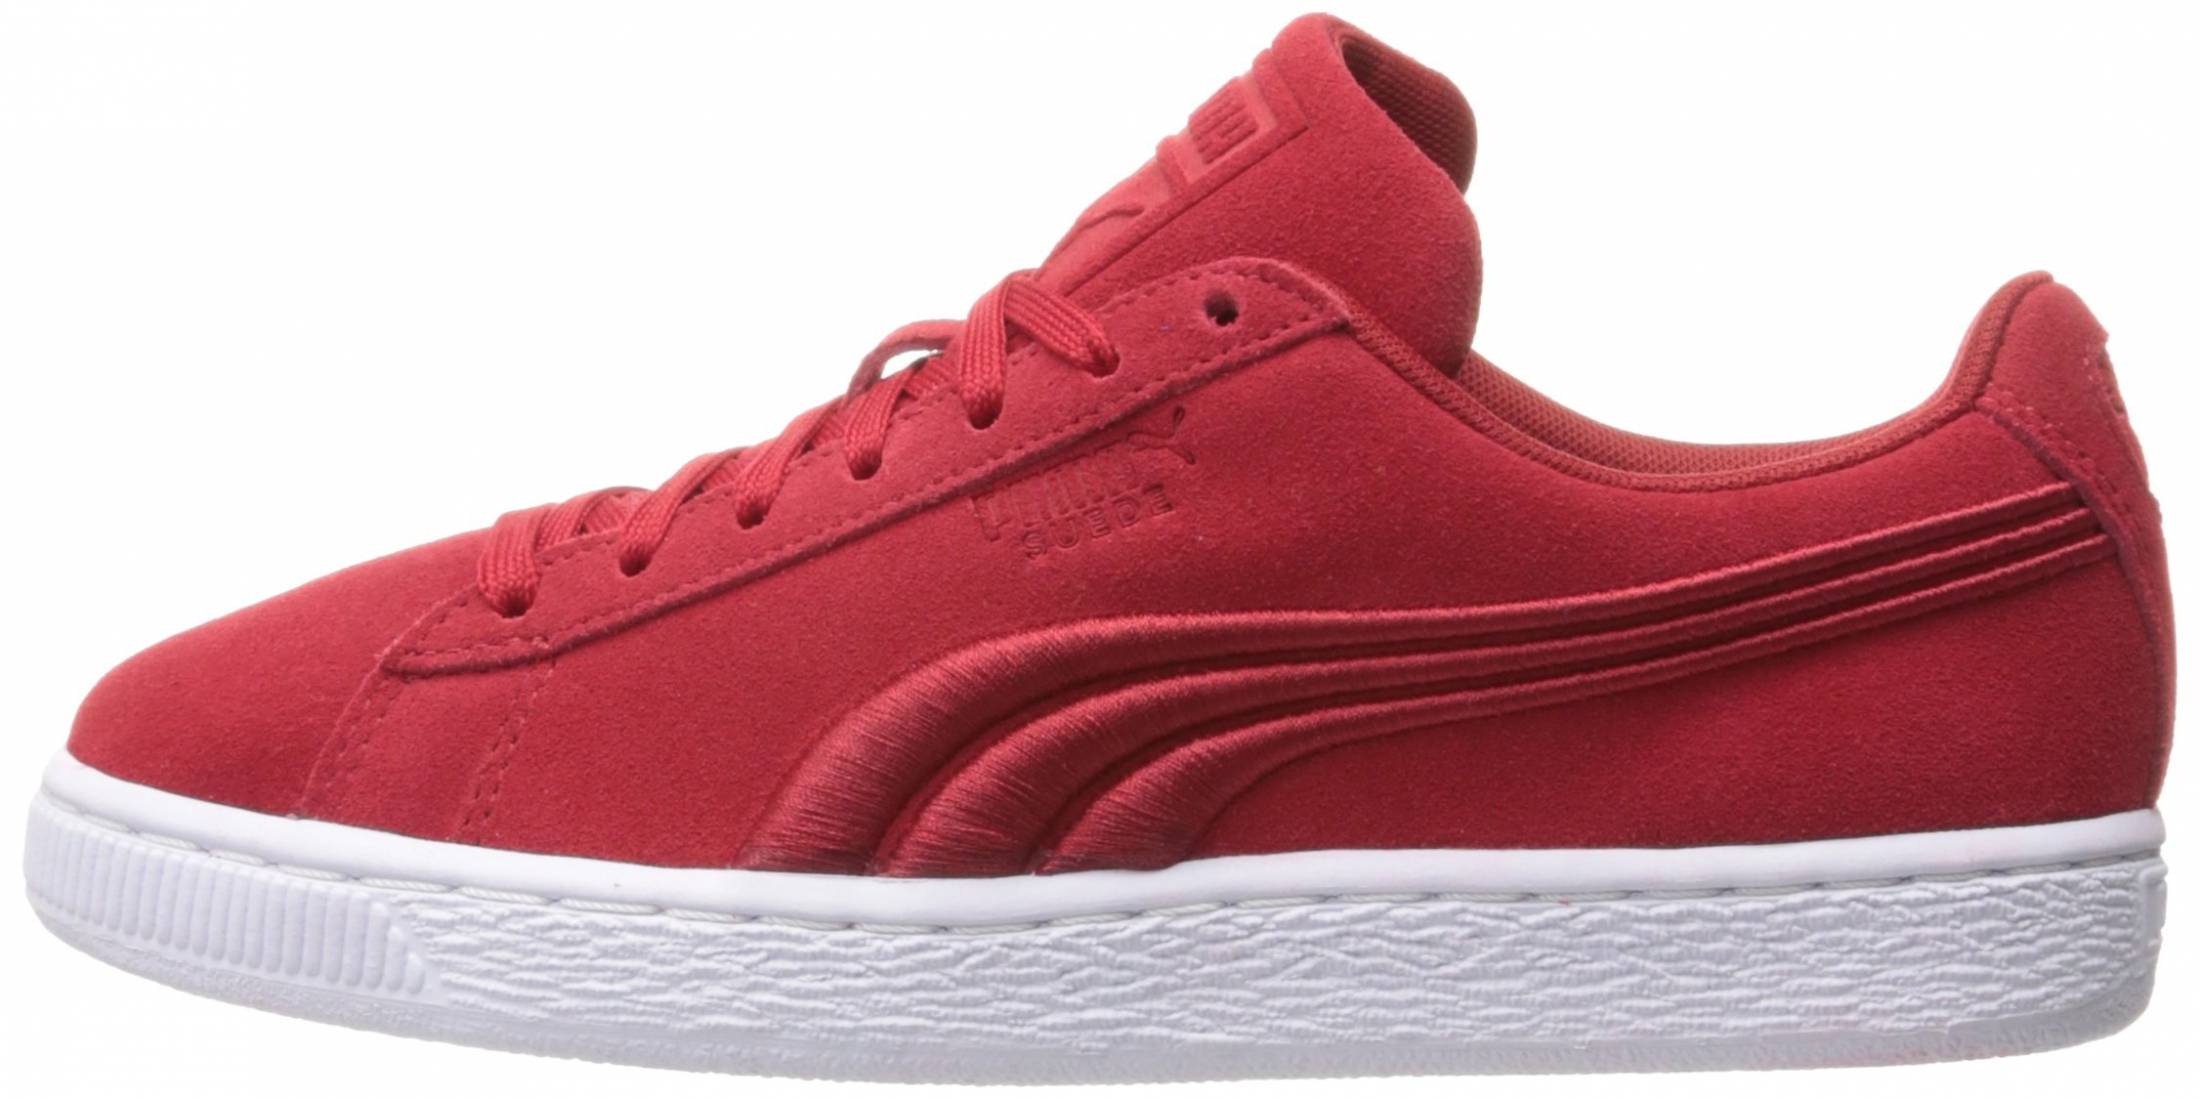 red pumas size 7